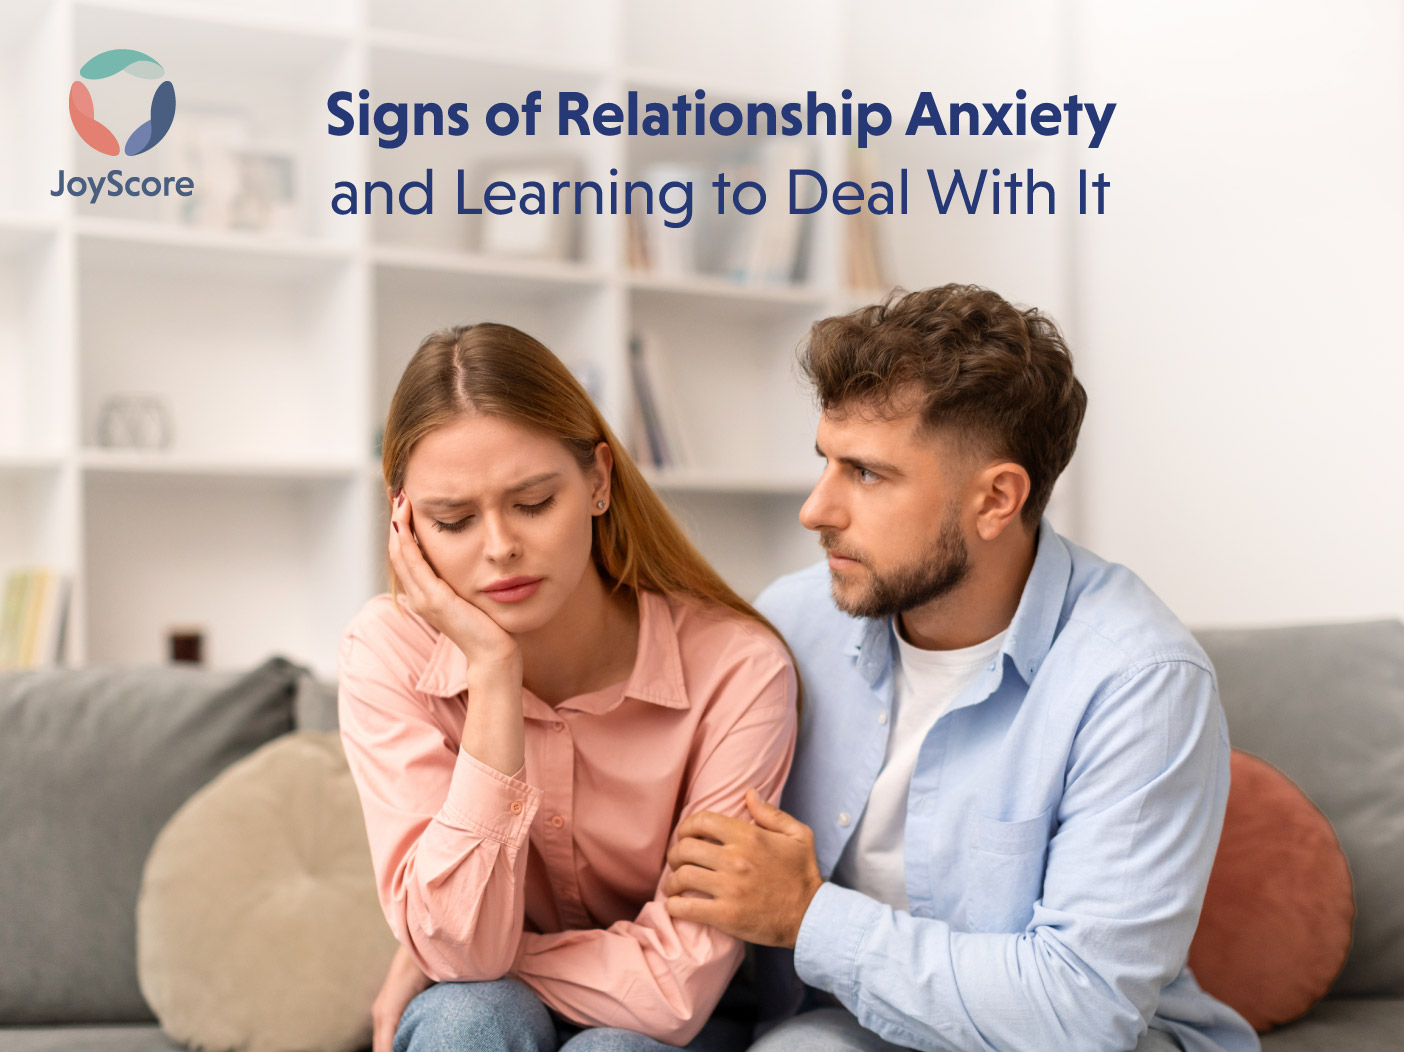 Relationship Anxiety: What Is It And How To Heal It?